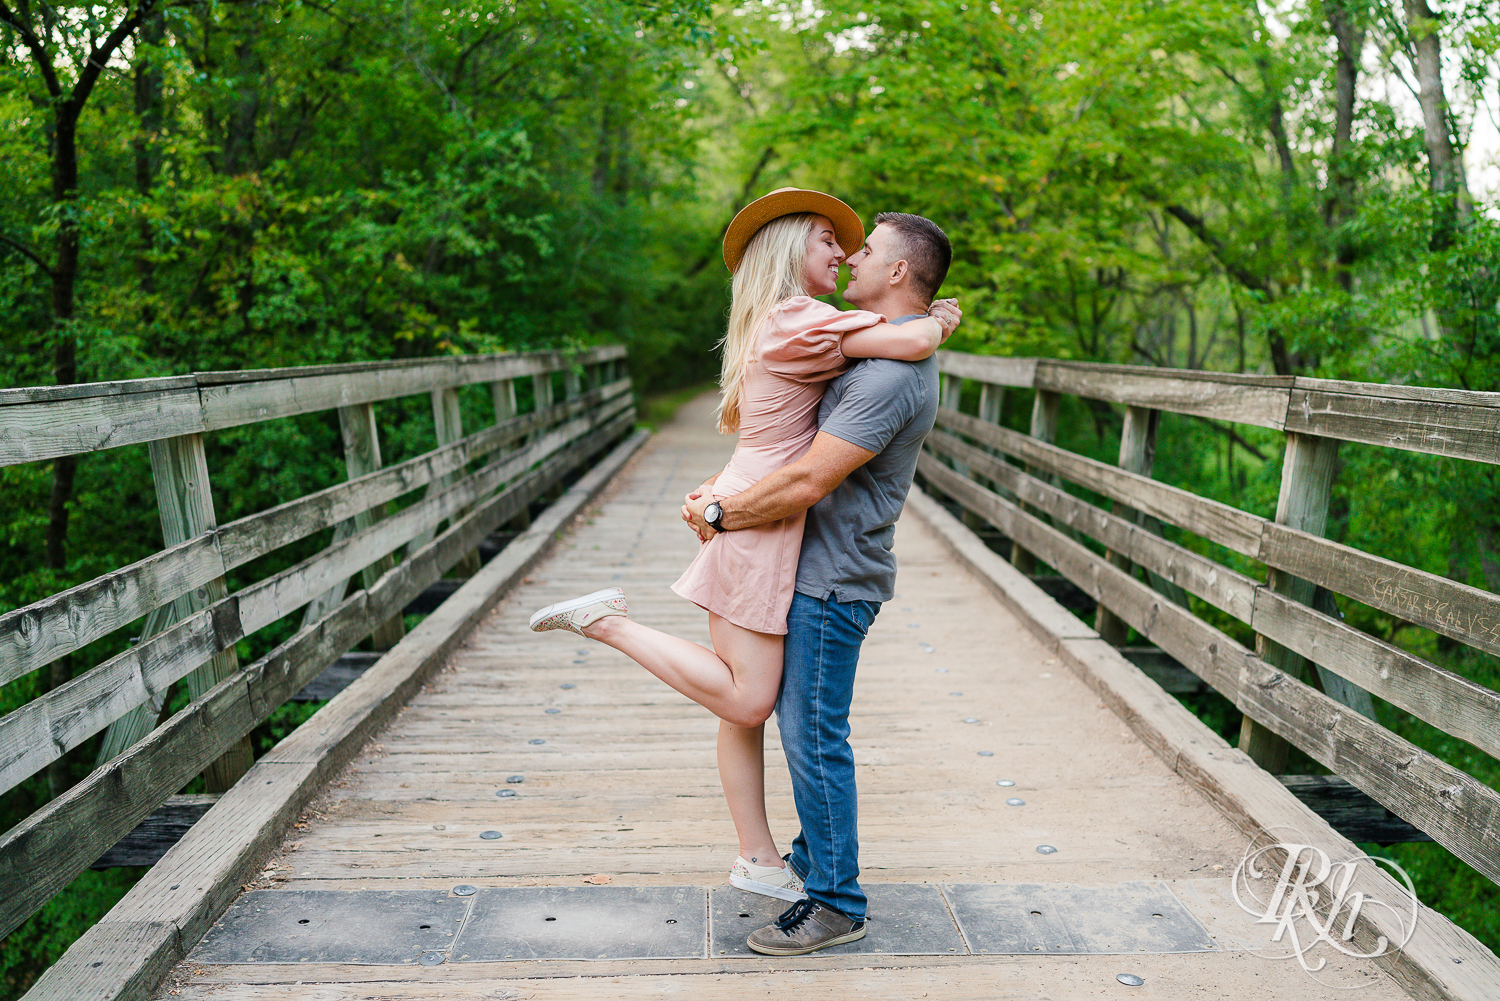 Man lifts blonde woman in hat and dress on a bridge at Afton State Park in Hastings, Minnesota.